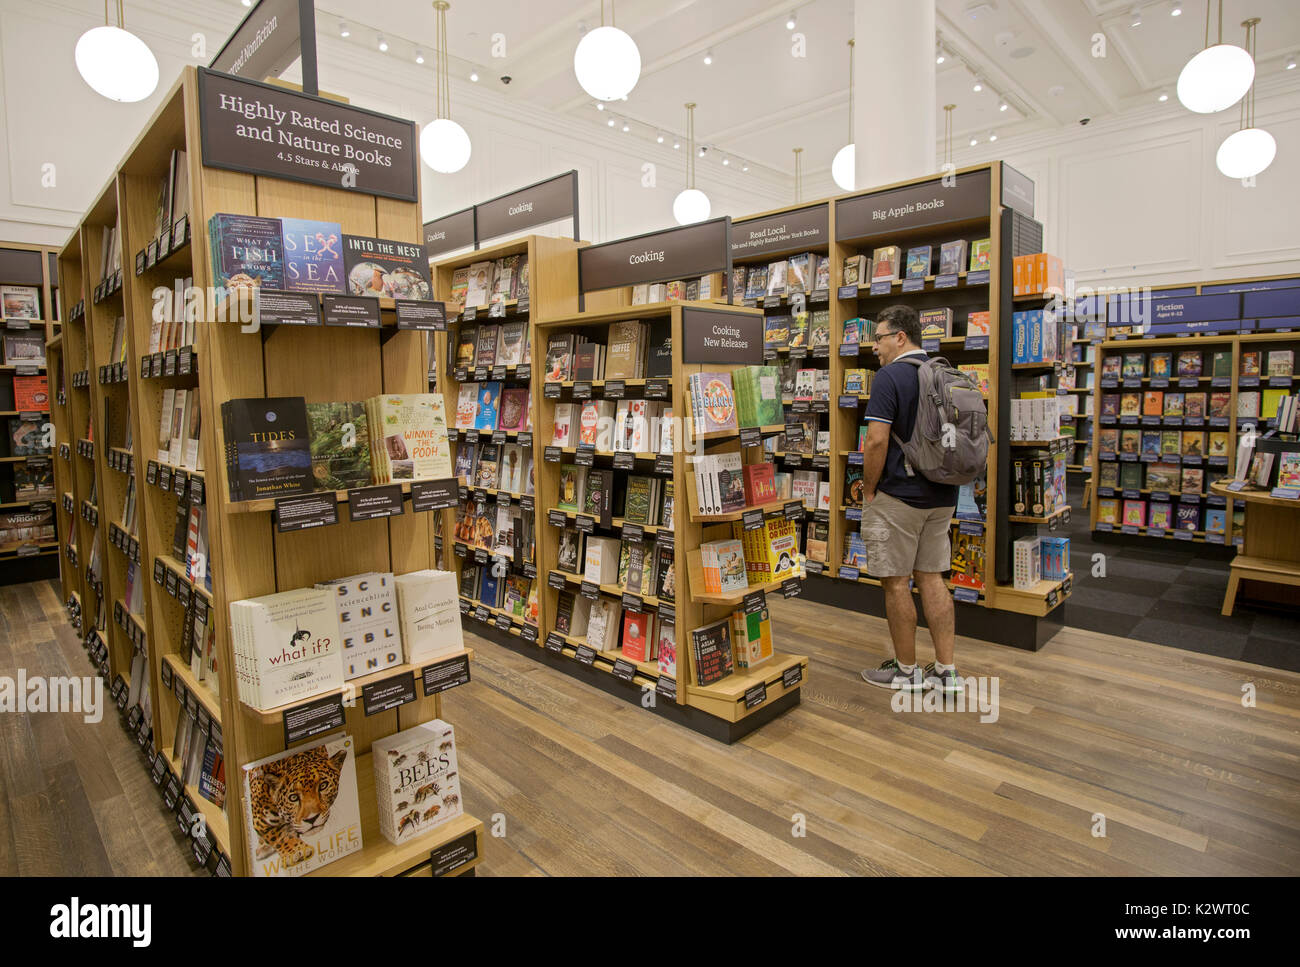 A man browsing at the recently opened Amazon Book Store on W. 34th Street in Manhattan, a rare Amazon brick & mortar store. Stock Photo